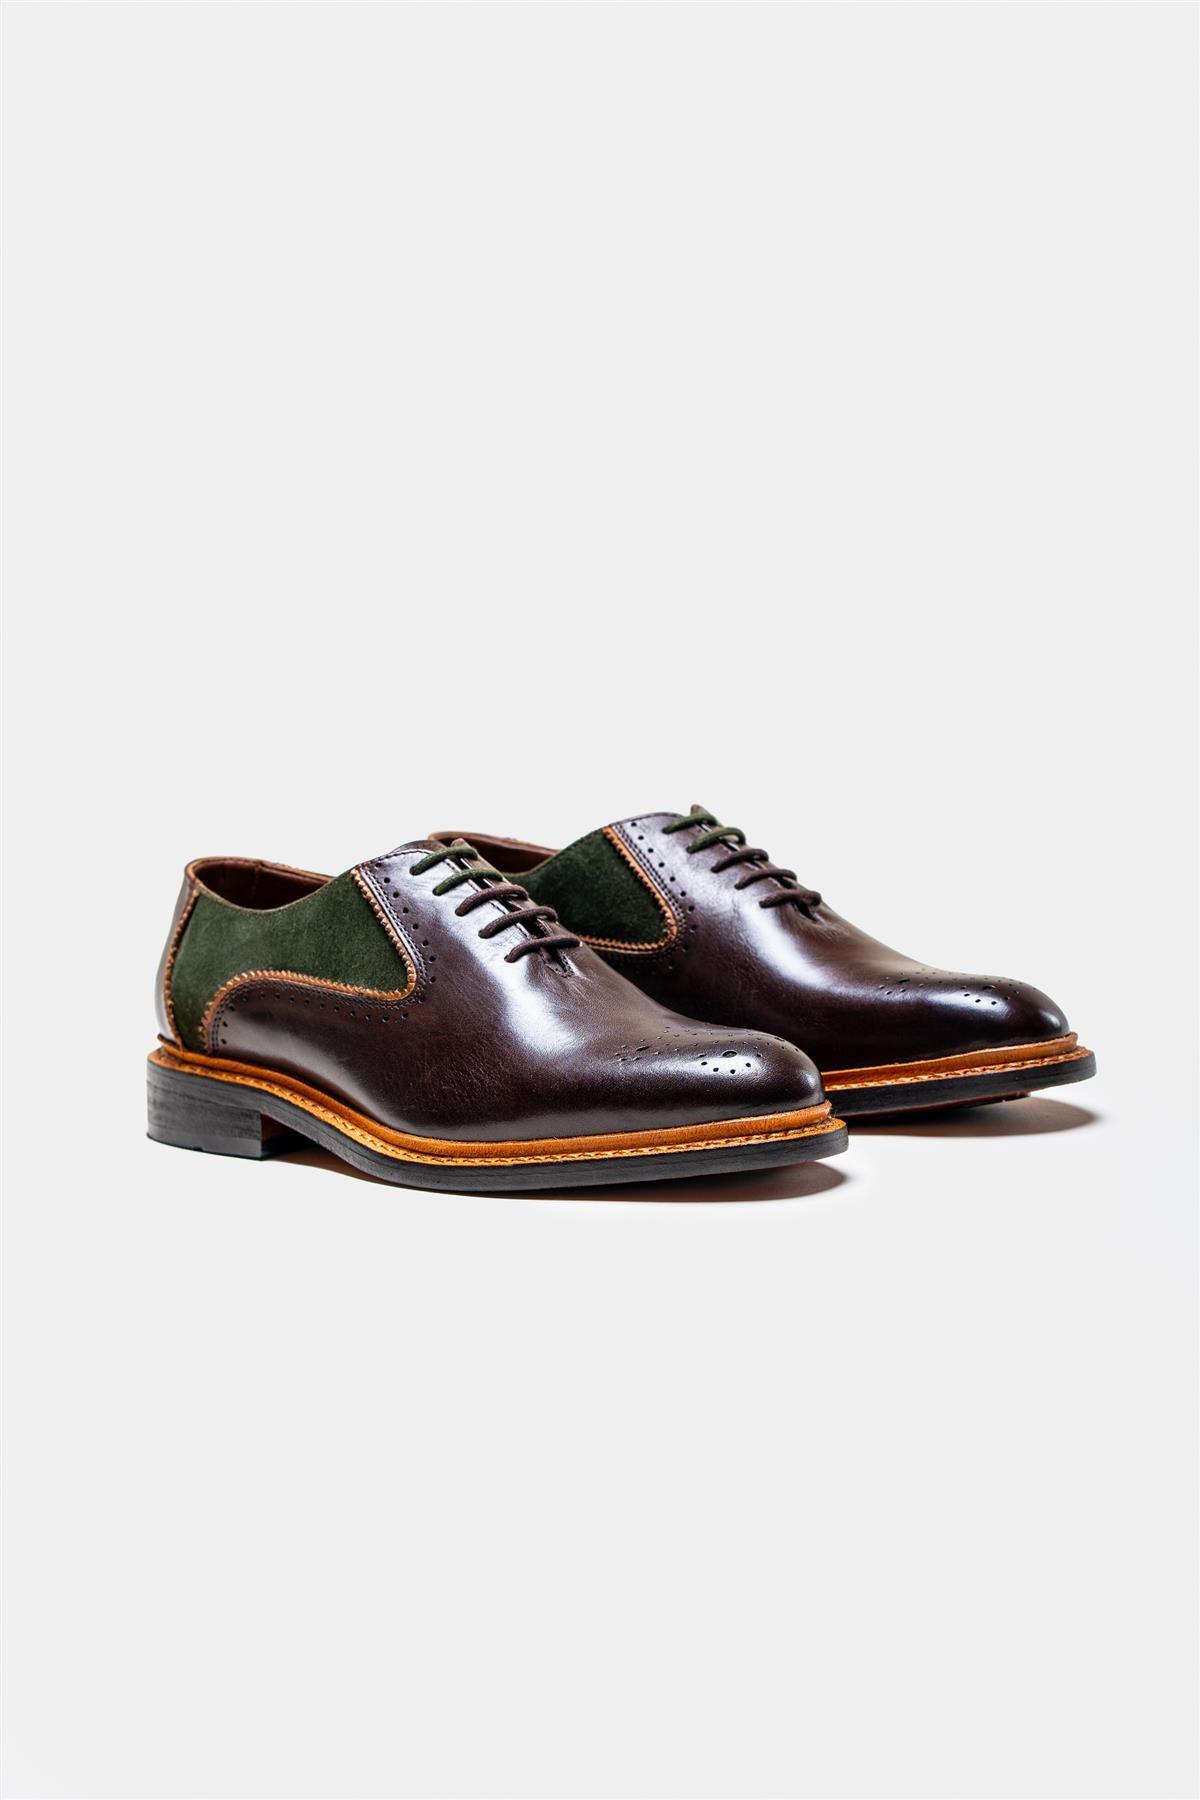 Brentwood brown/olive shoes front